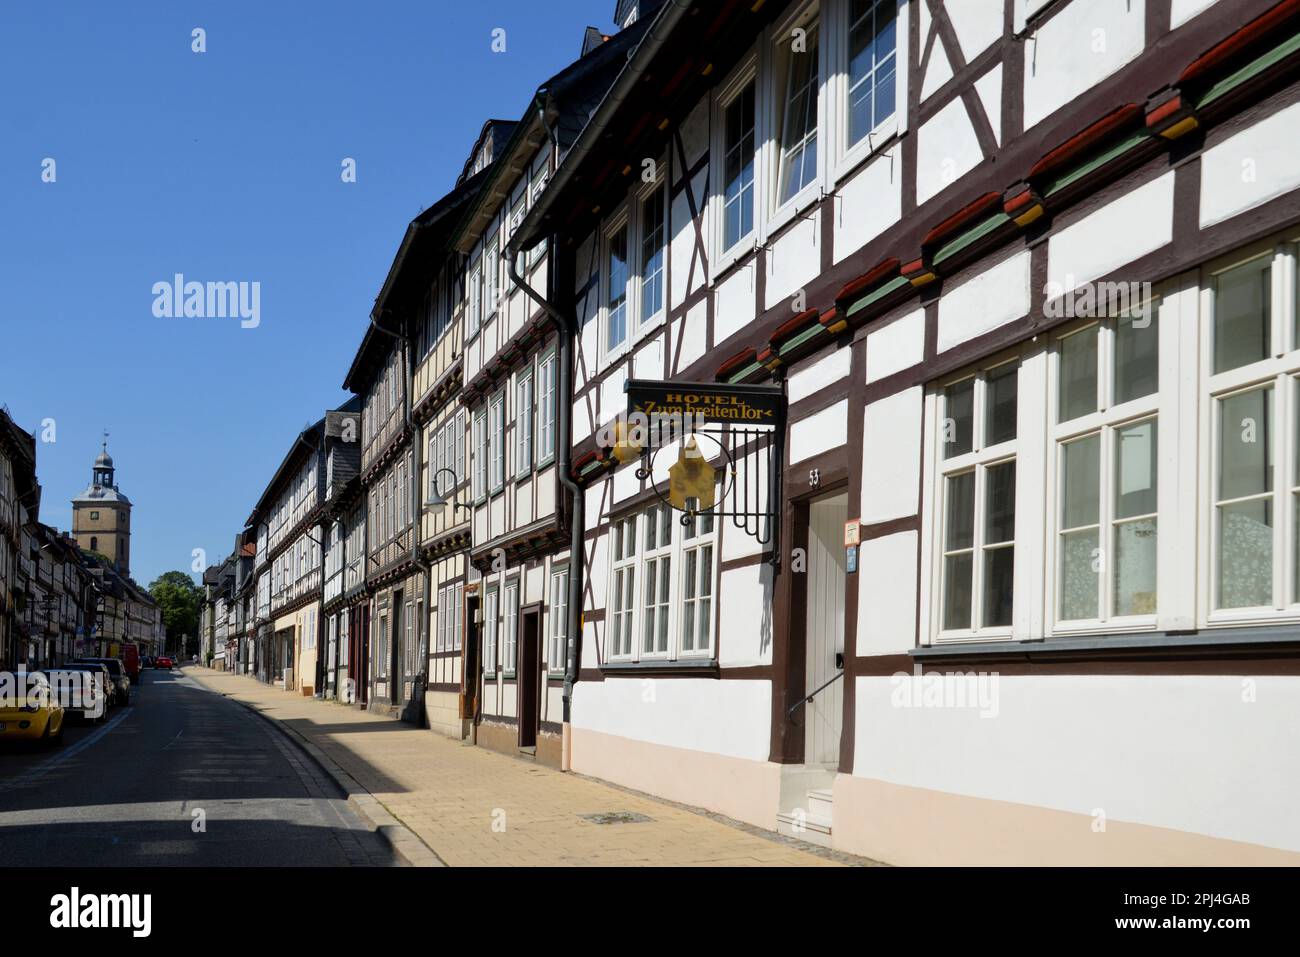 Germany, Lower Saxony, Goslar:   a row of timber frame houses on Breite Strasse, with the Hotel zum Breiten Tor in the foreground Stock Photo